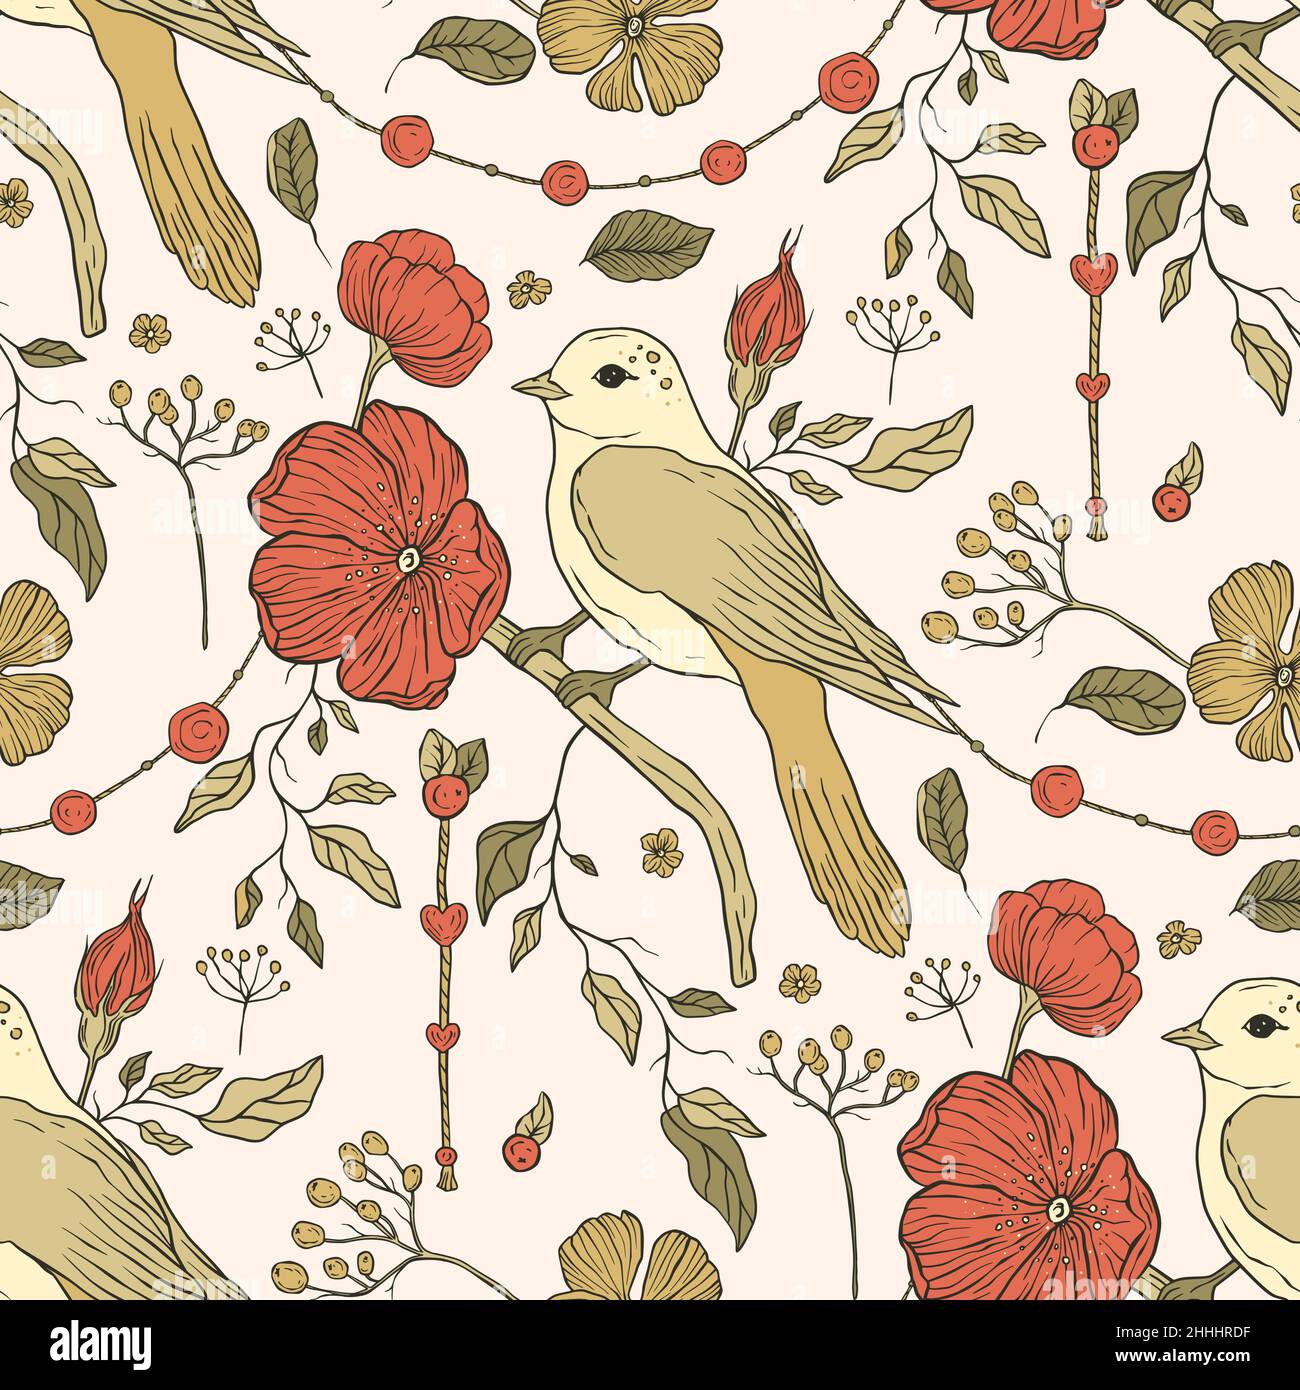 Vintage aesthetic bird boho floral seamless pattern with rose flower Stock Vector